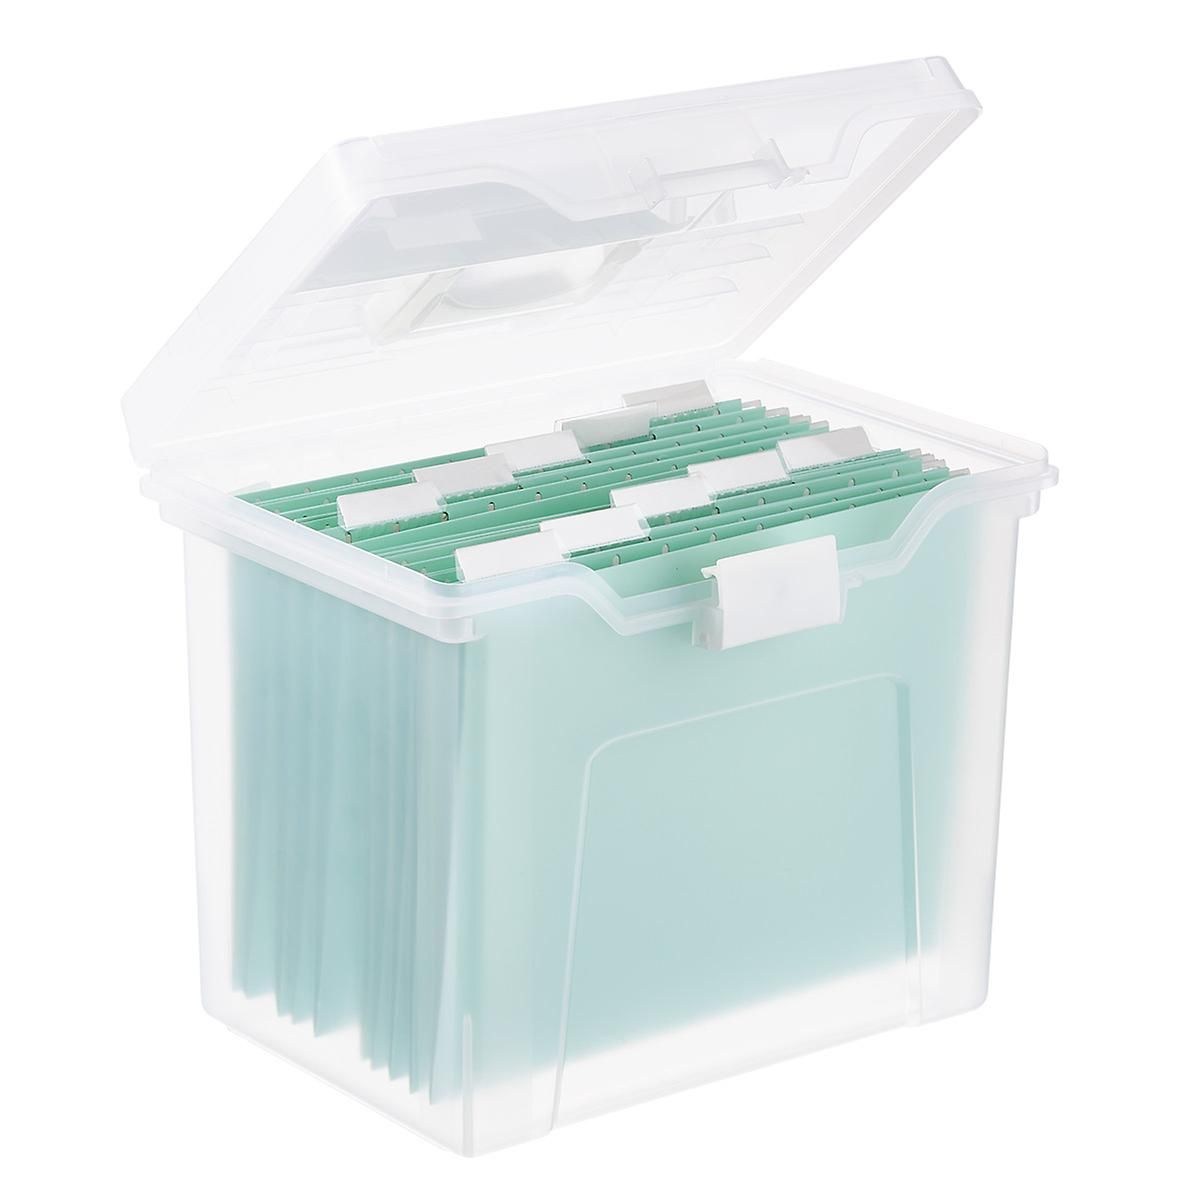 Iris Clear Letter-Size Portable File Box with Lid Organizer | The Container Store